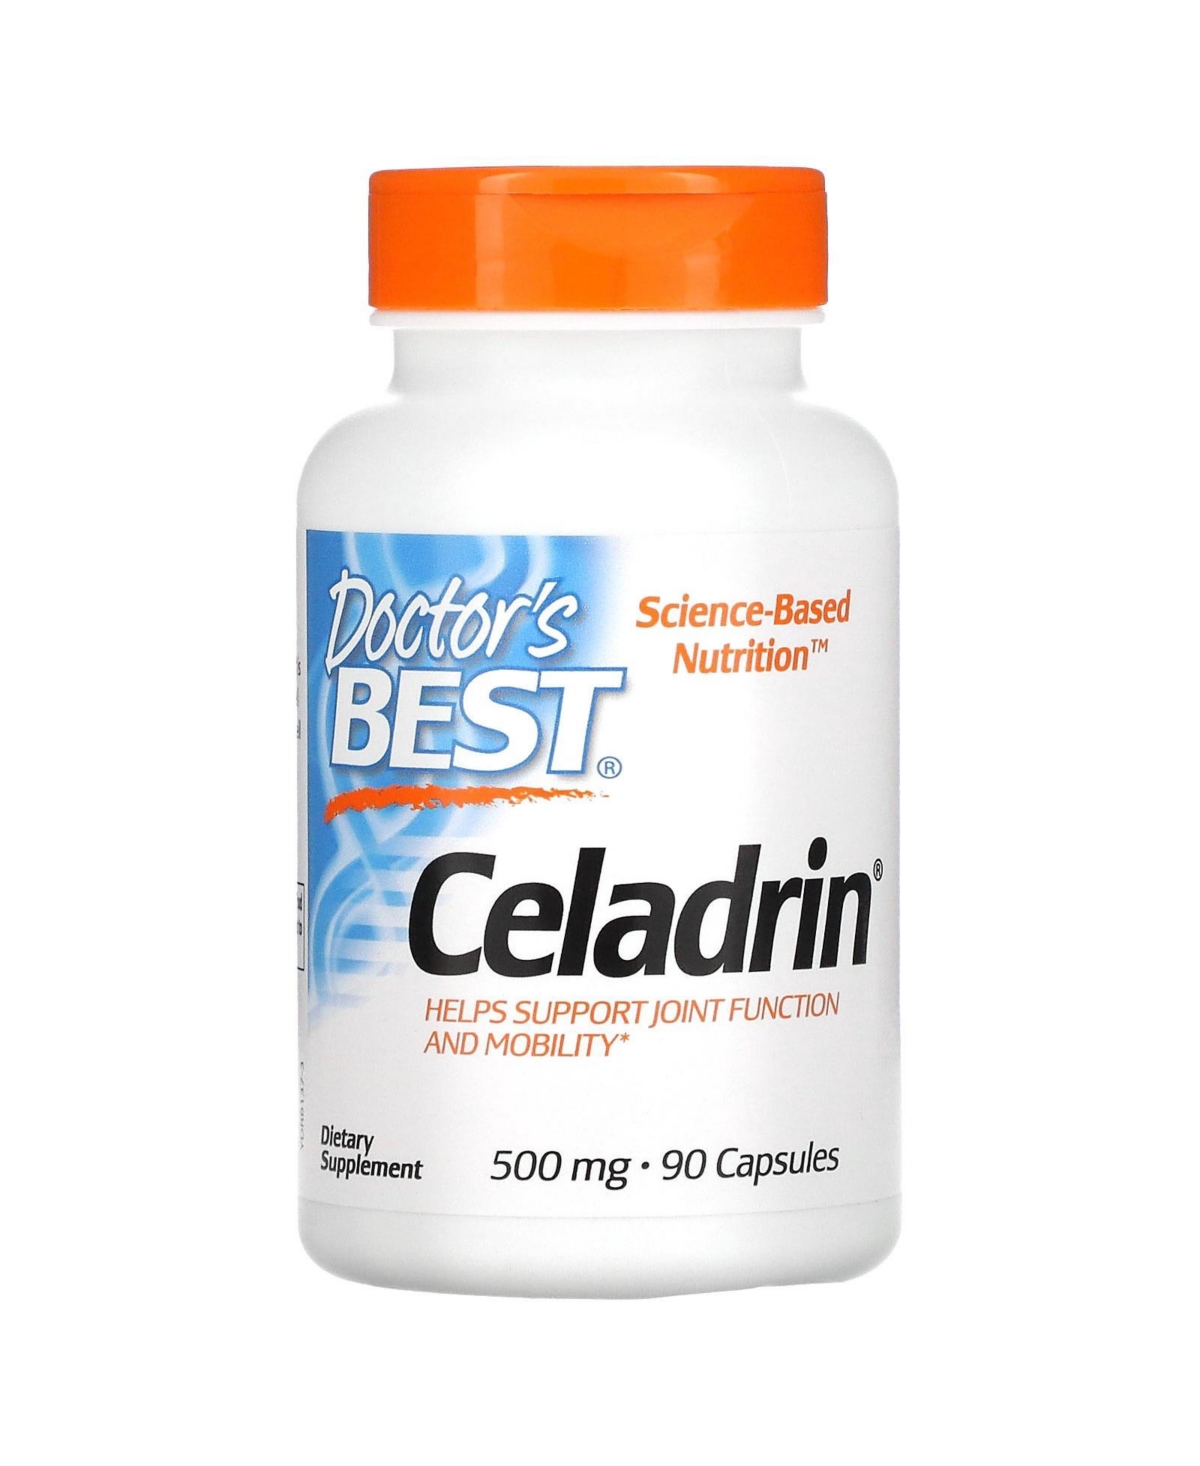 Celadrin 500 mg - 90 Capsules - Assorted Pre-Pack